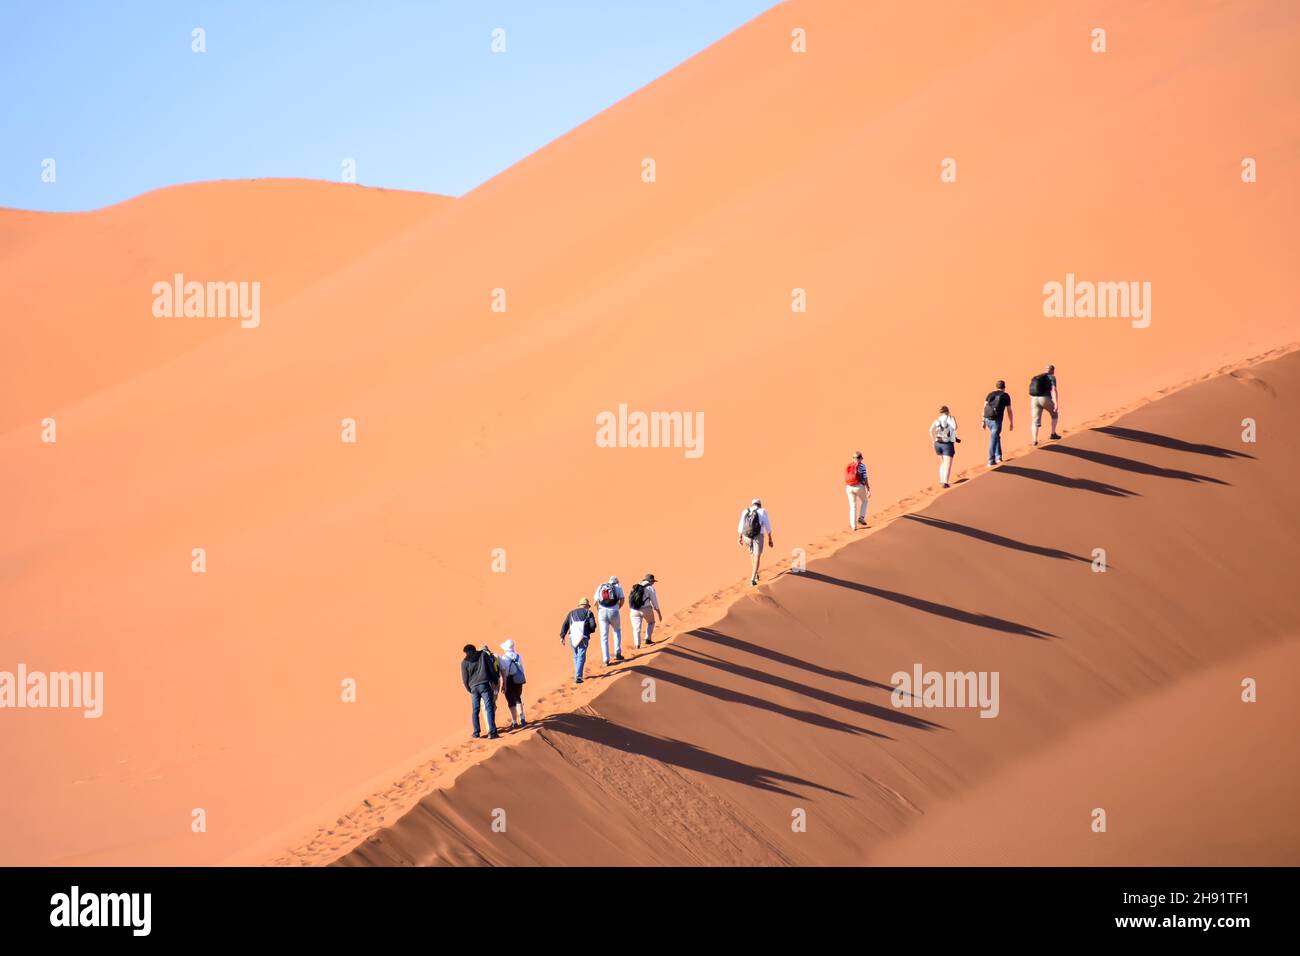 Tourists hiking uphill on the famous sand dunes in the Namib-Naukluft park area in Namibia Southern Africa against a blue sky Stock Photo